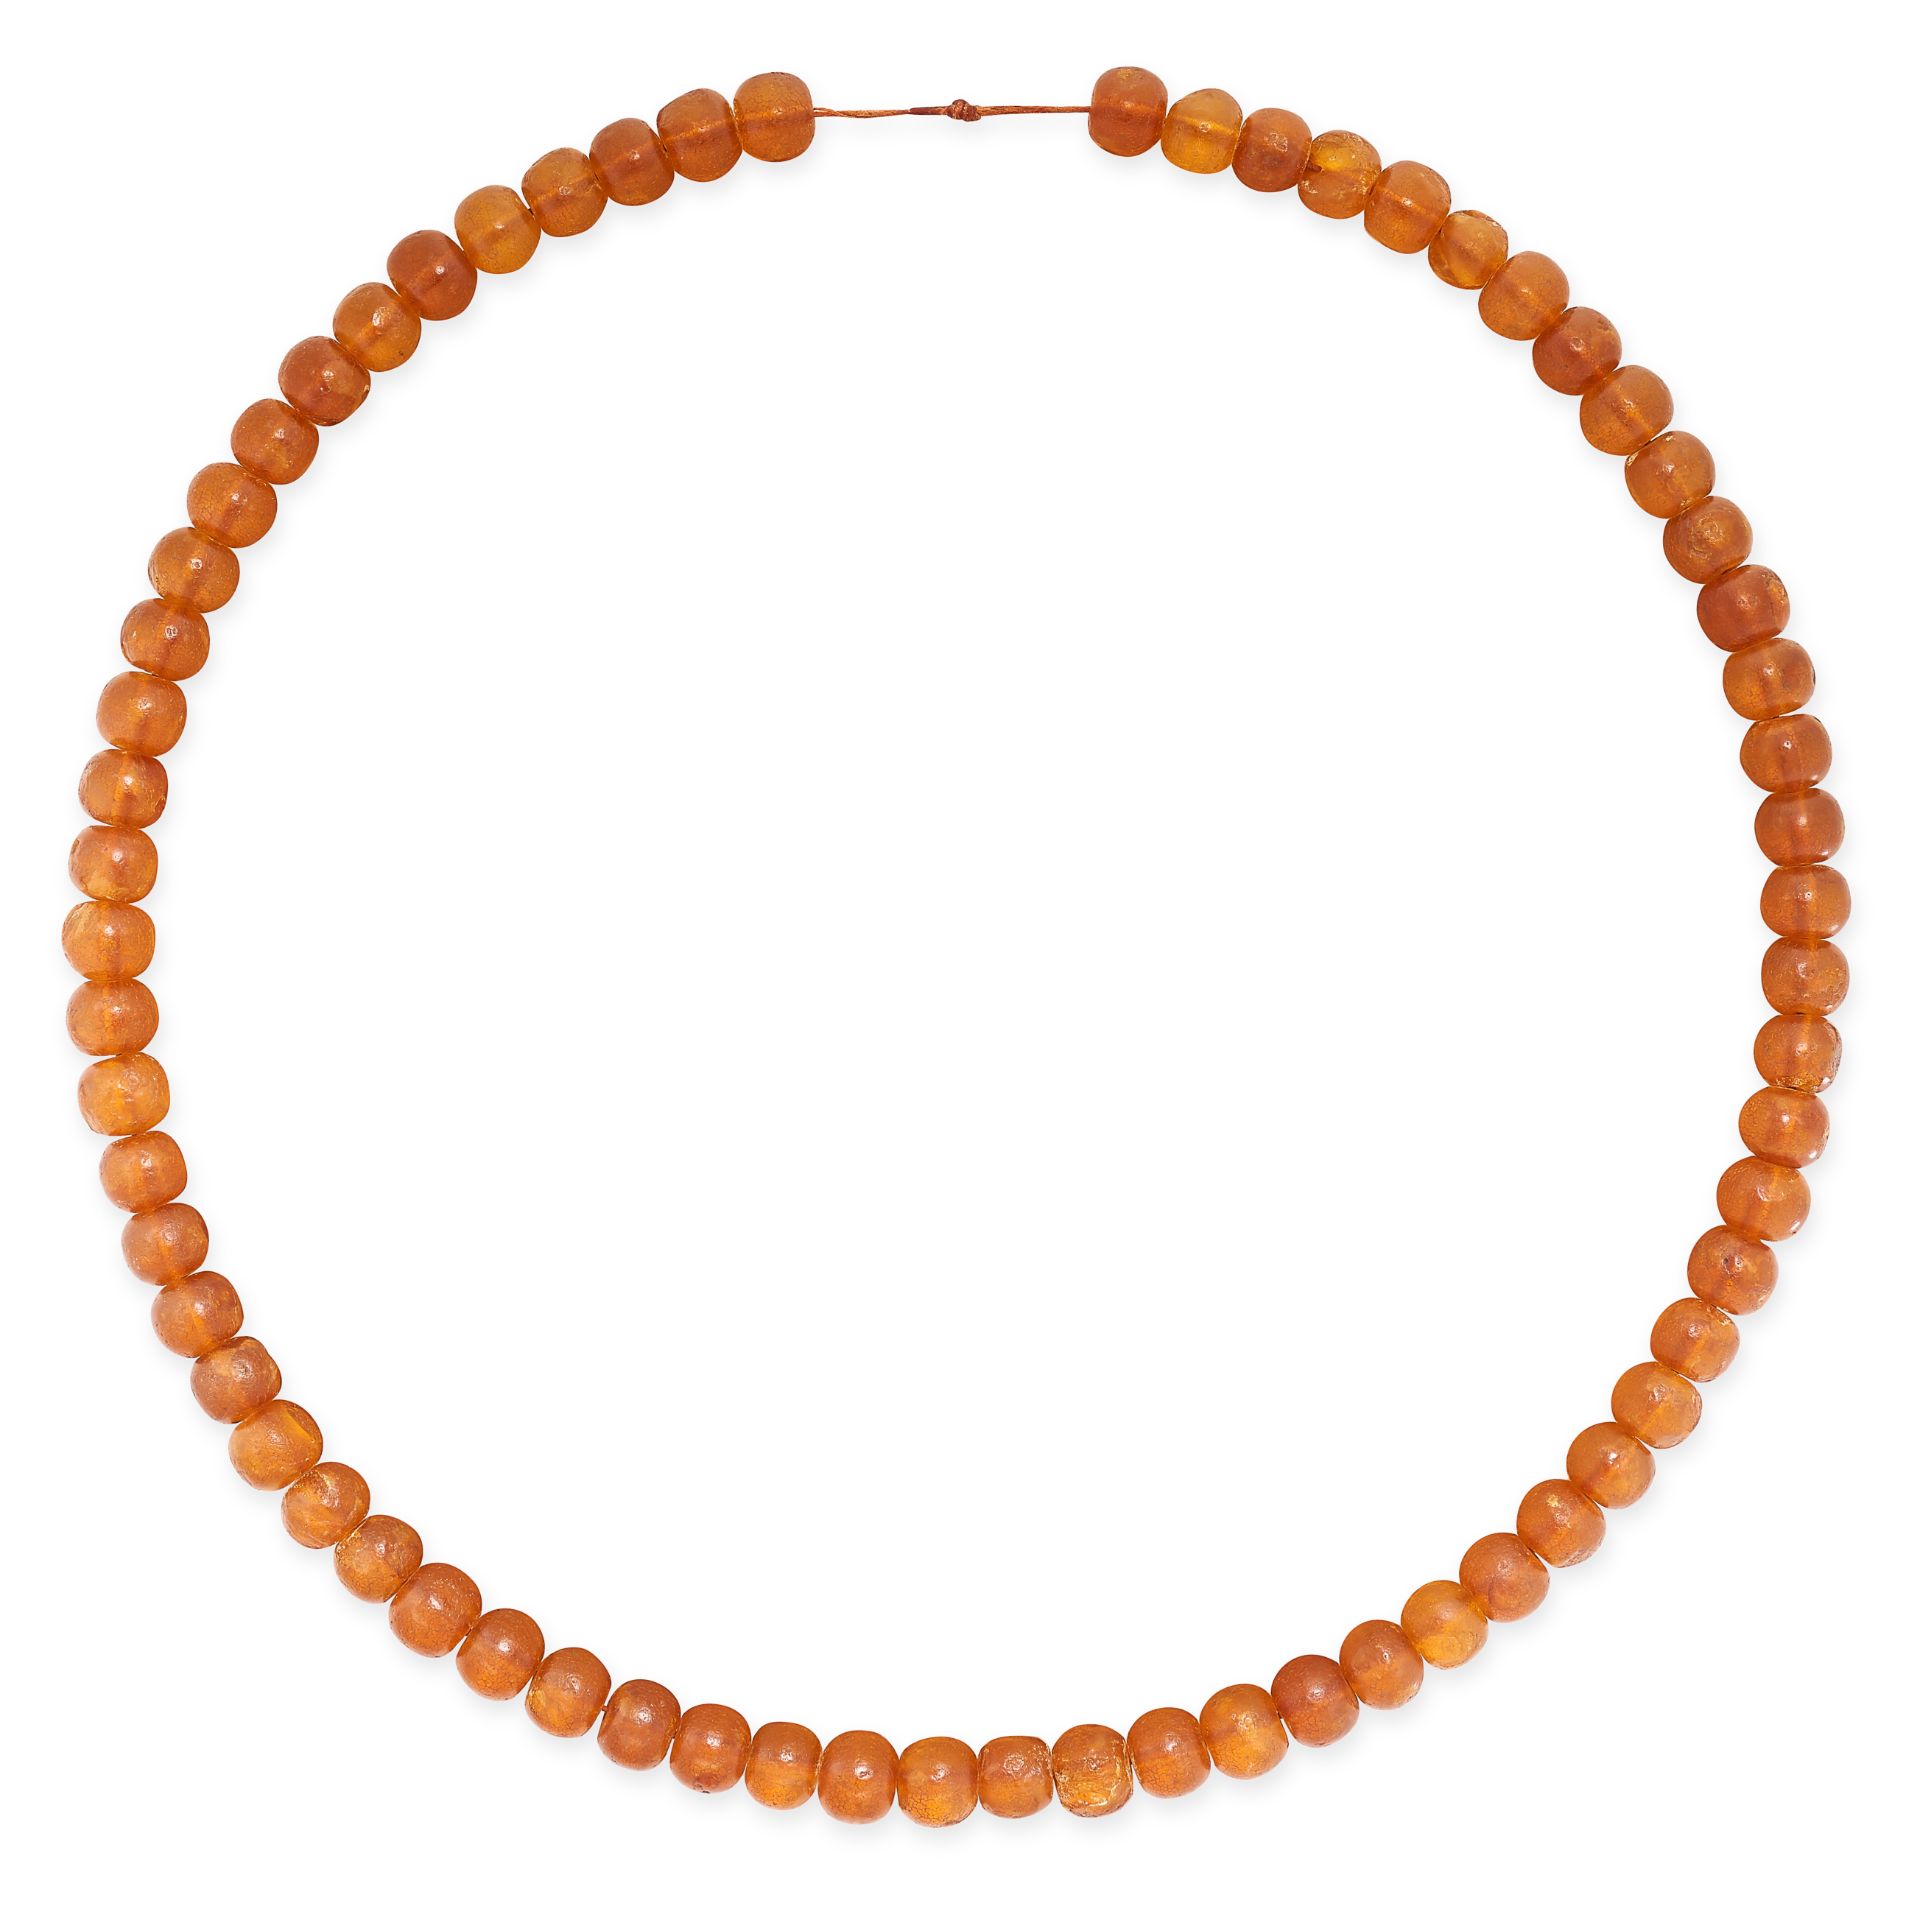 NO RESERVE- TWO AMBER BEAD NECKLACES one with butterscotch amber beads the other with round amber - Image 2 of 2